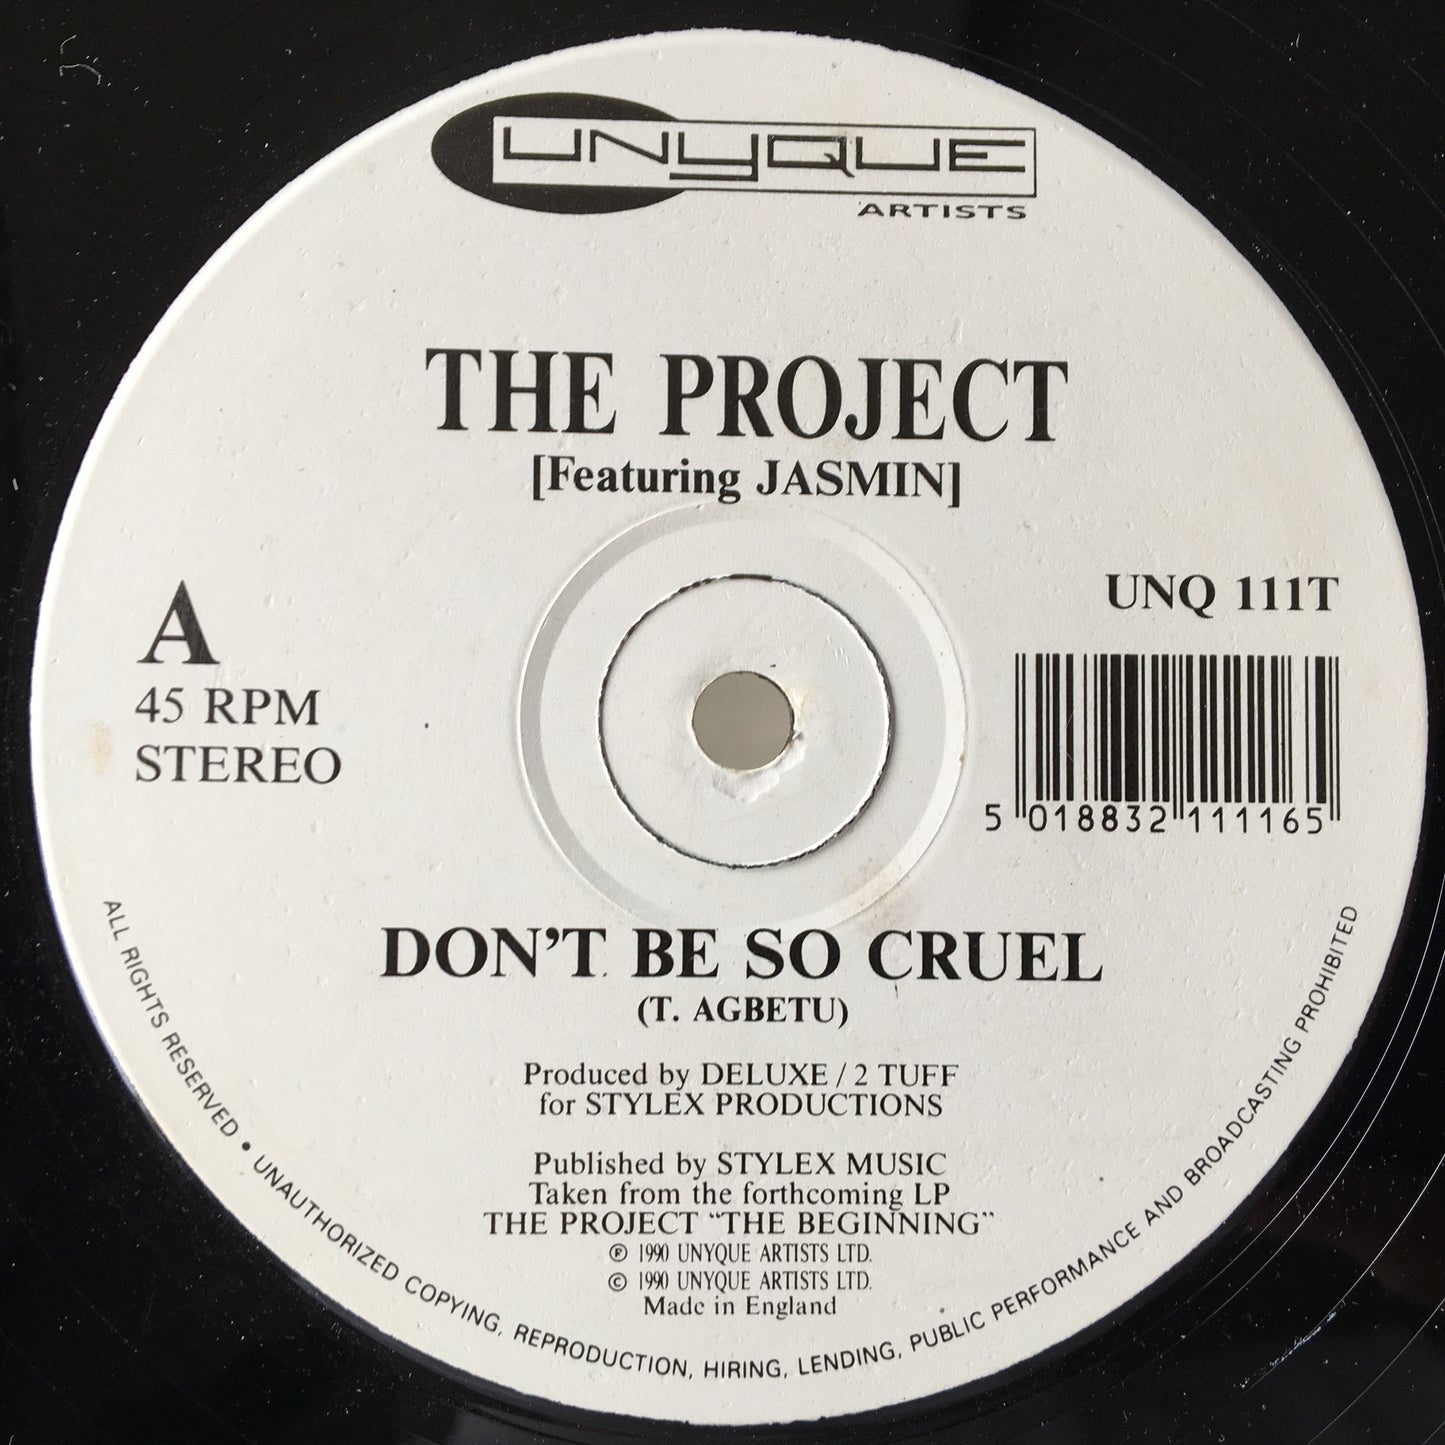 The Project Featuring Jasmin – Don't Be So Cruel